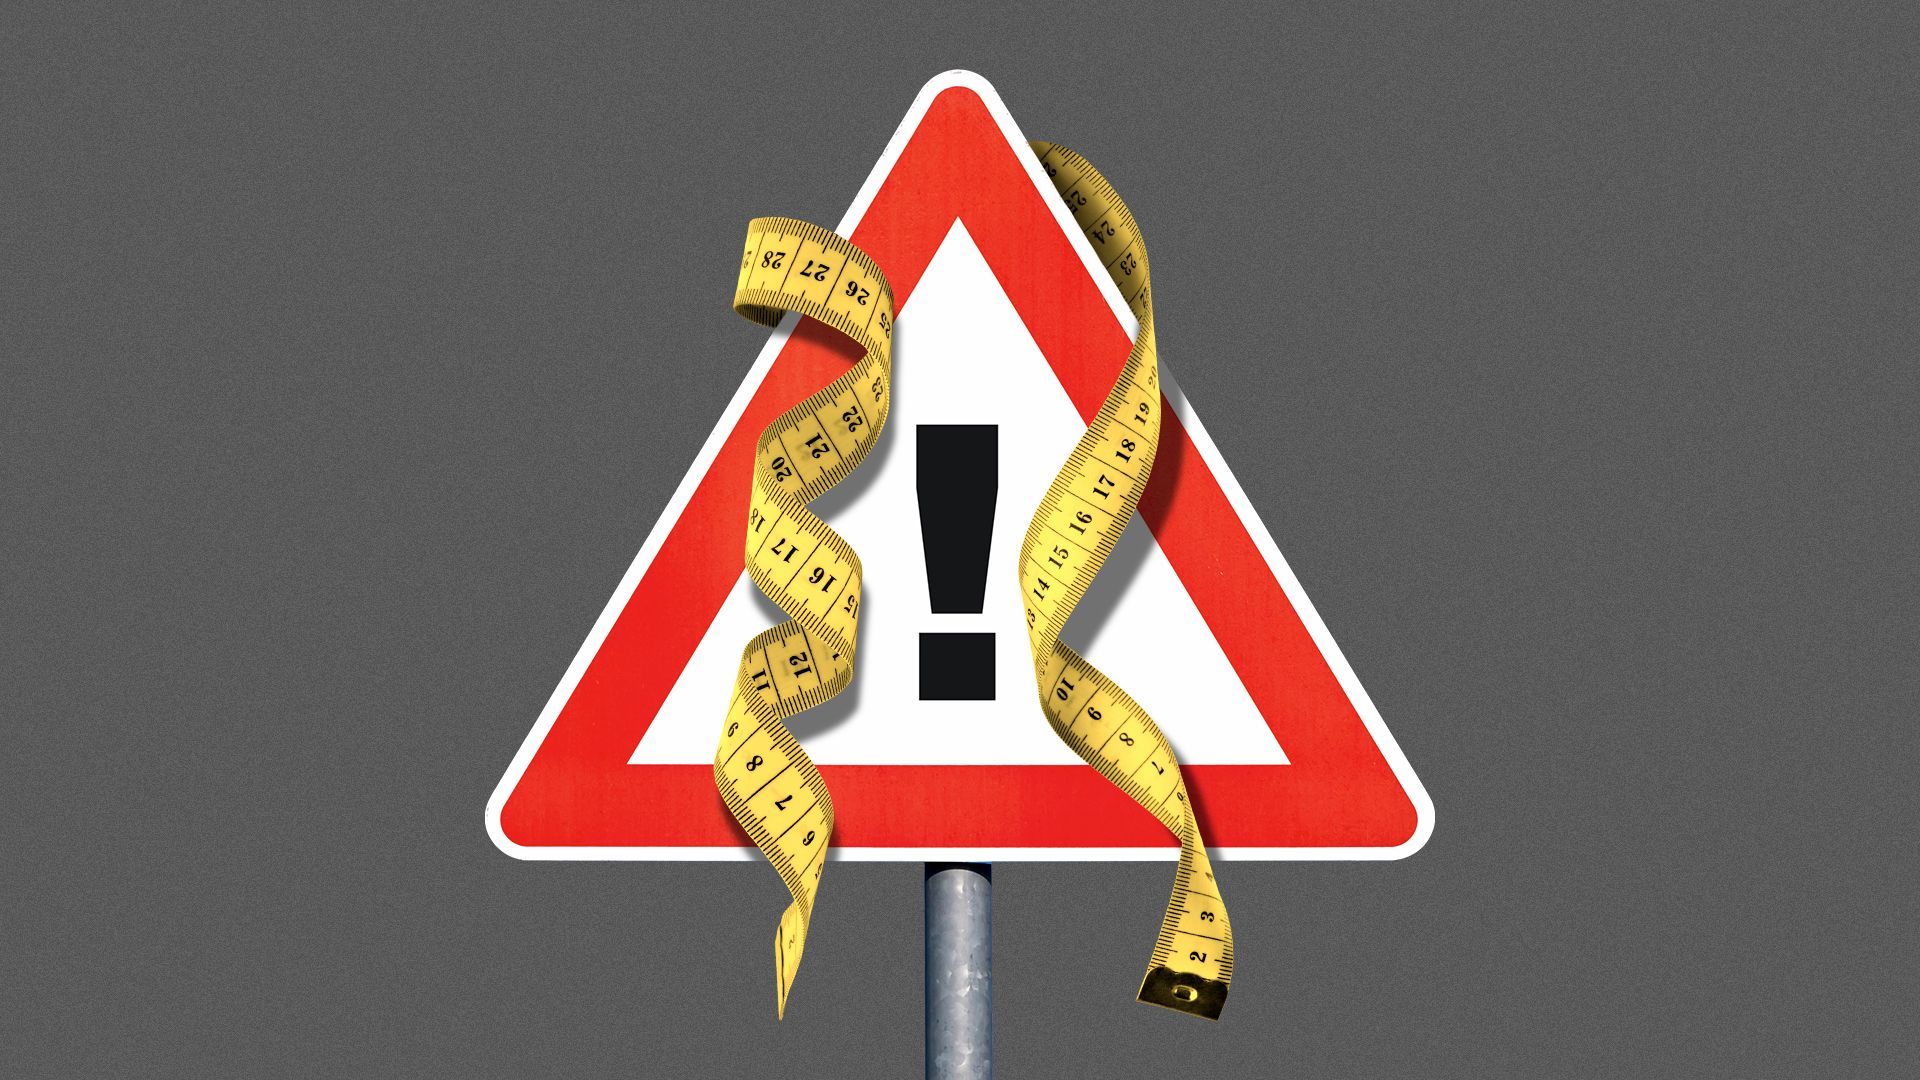 Illustration of measuring tape draped around a caution street sign.